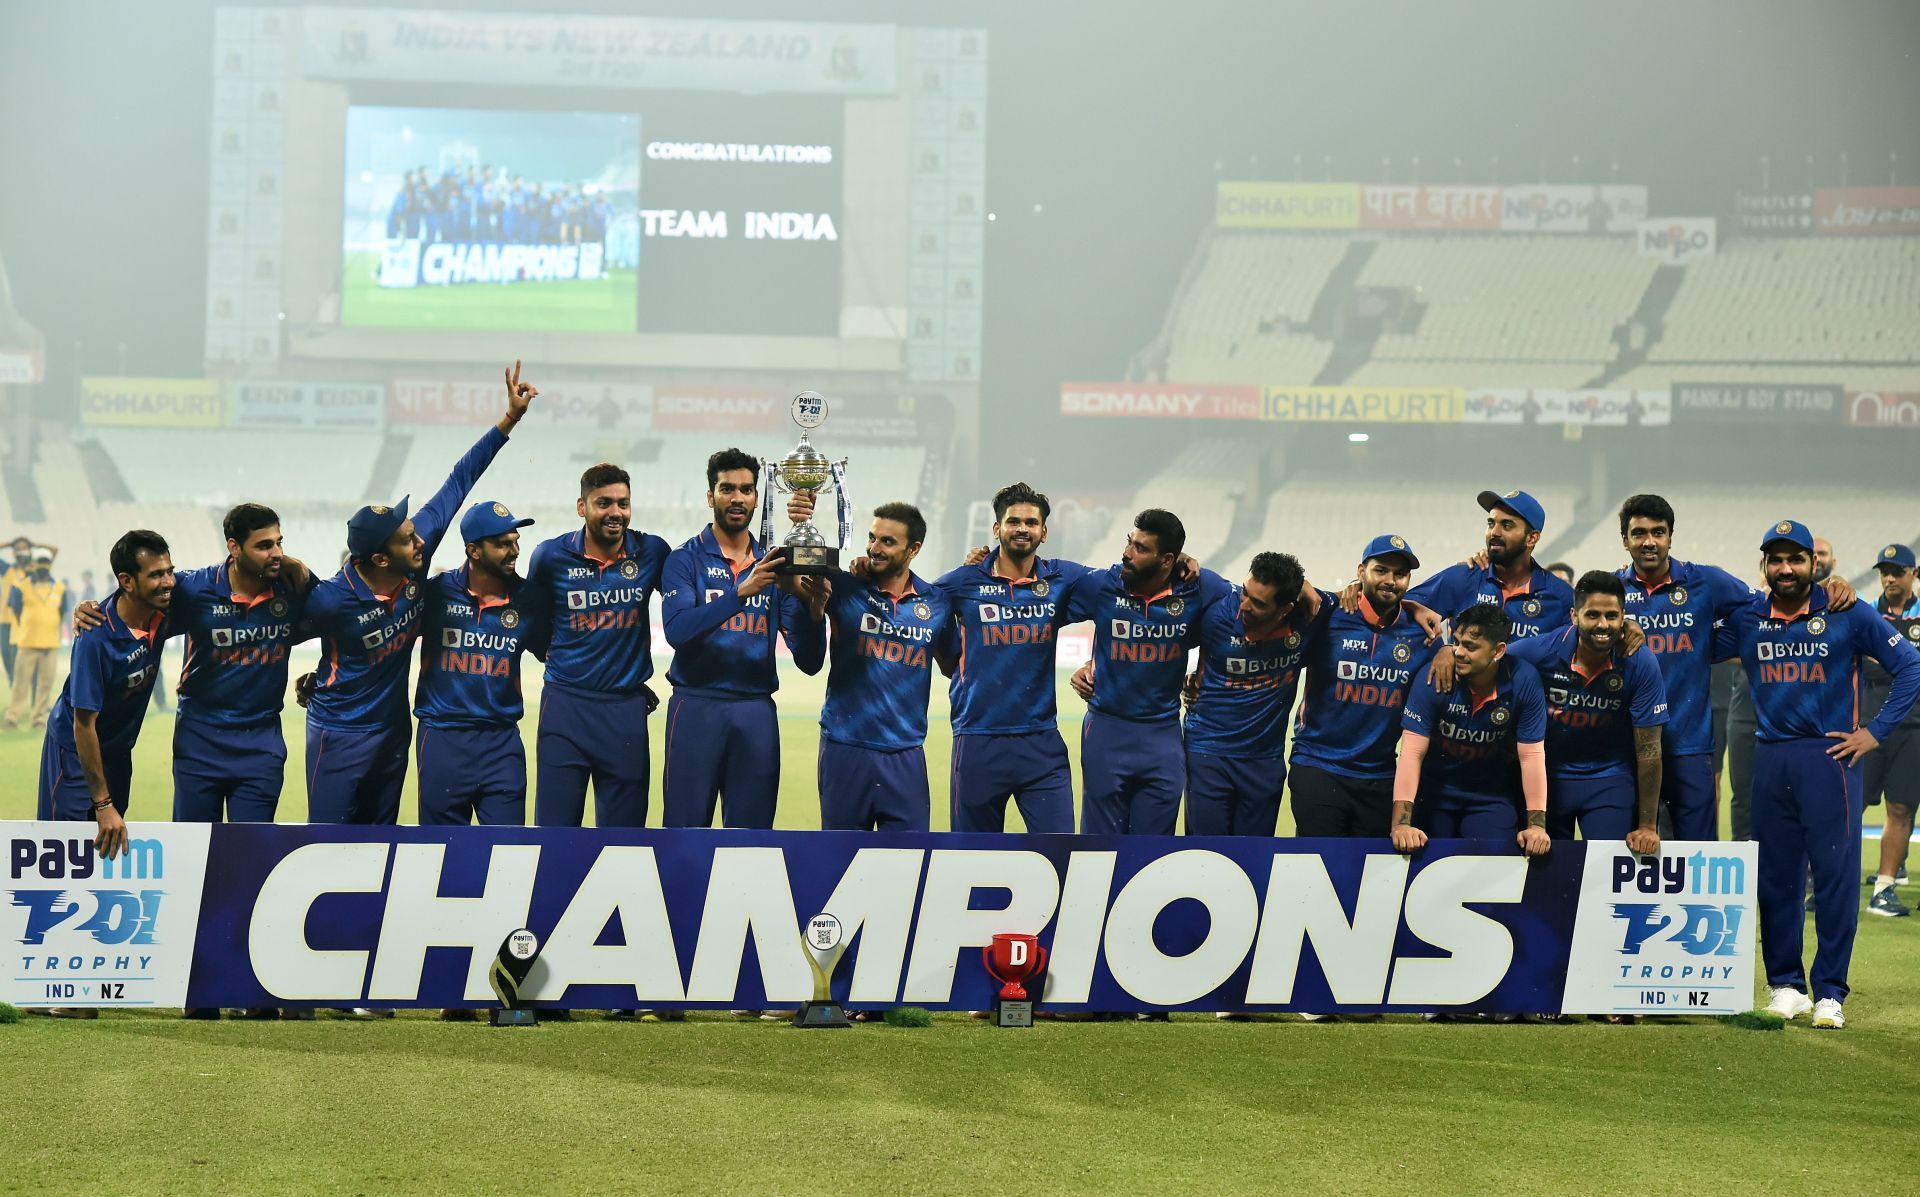 India did not lose a single ODI series in 2021